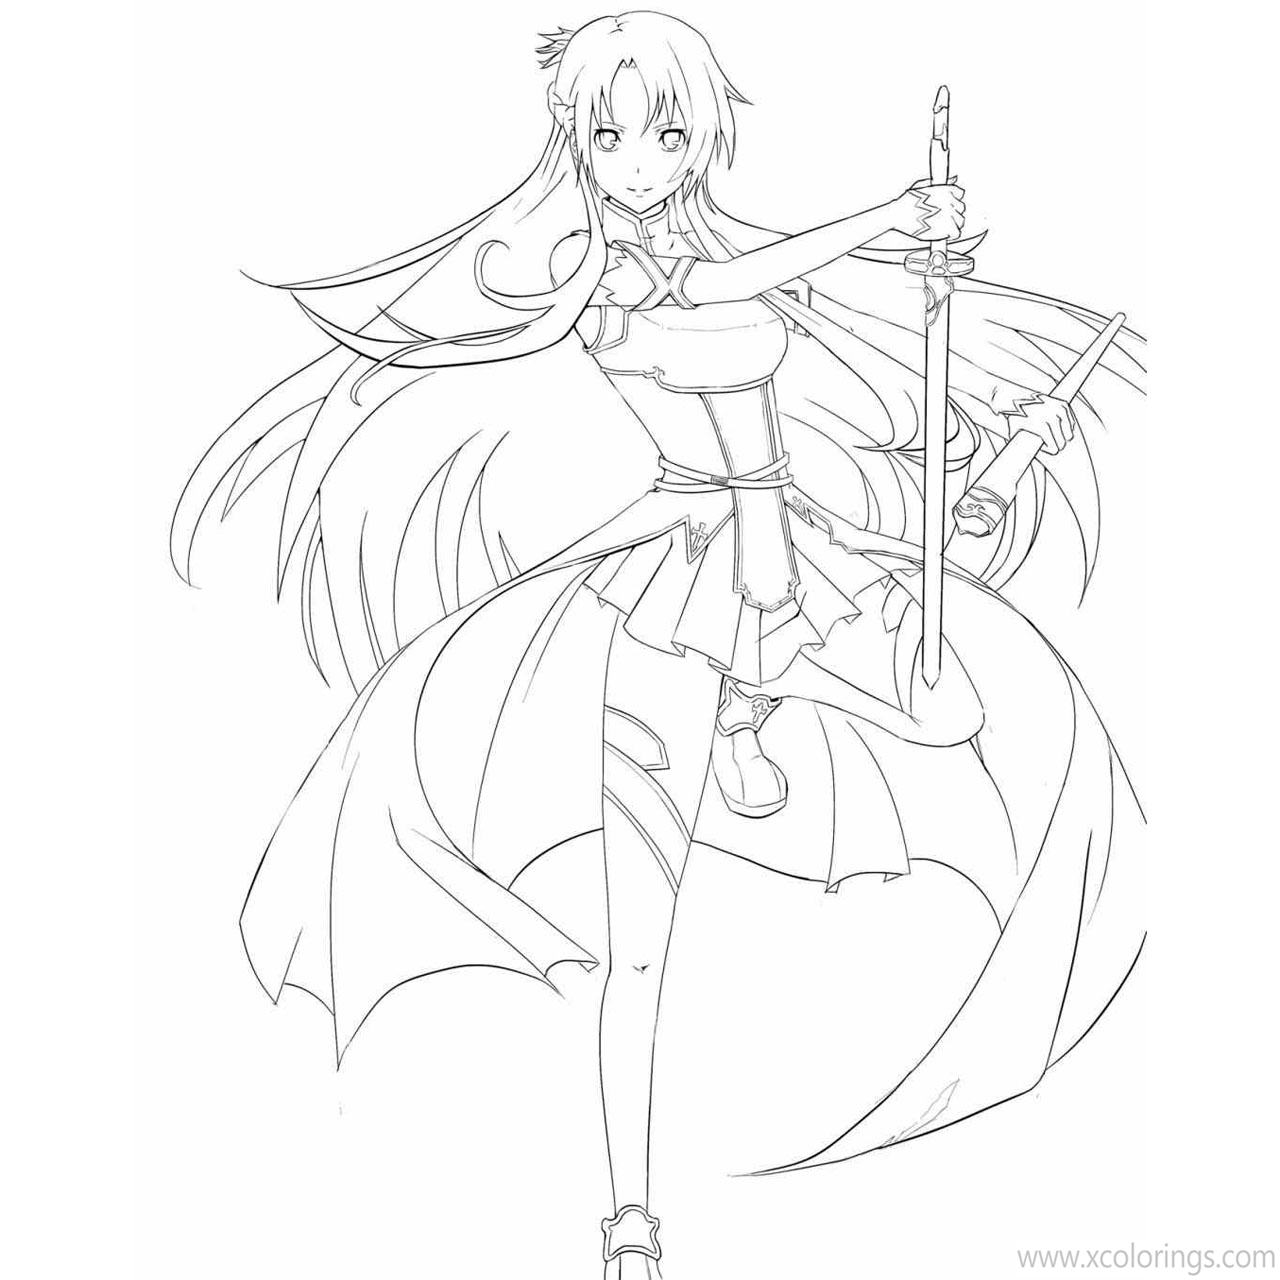 Free Sword Art Online Coloring Pages Asuna with Sword printable